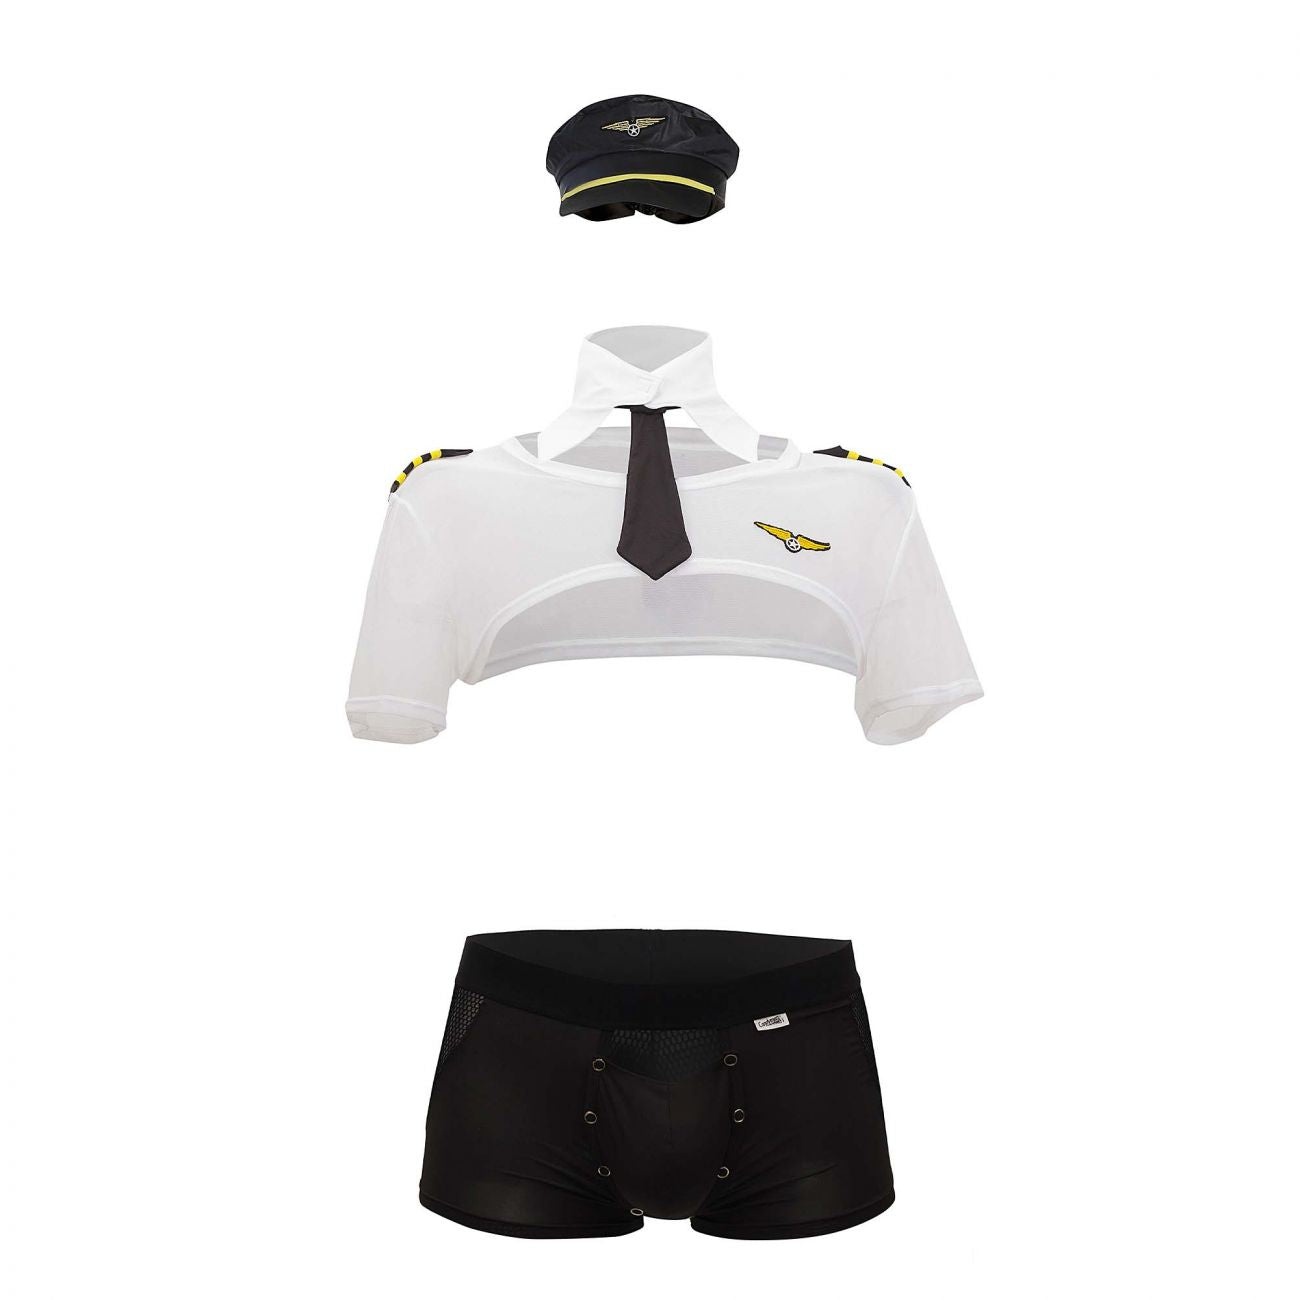 Pilot Costume Outfit